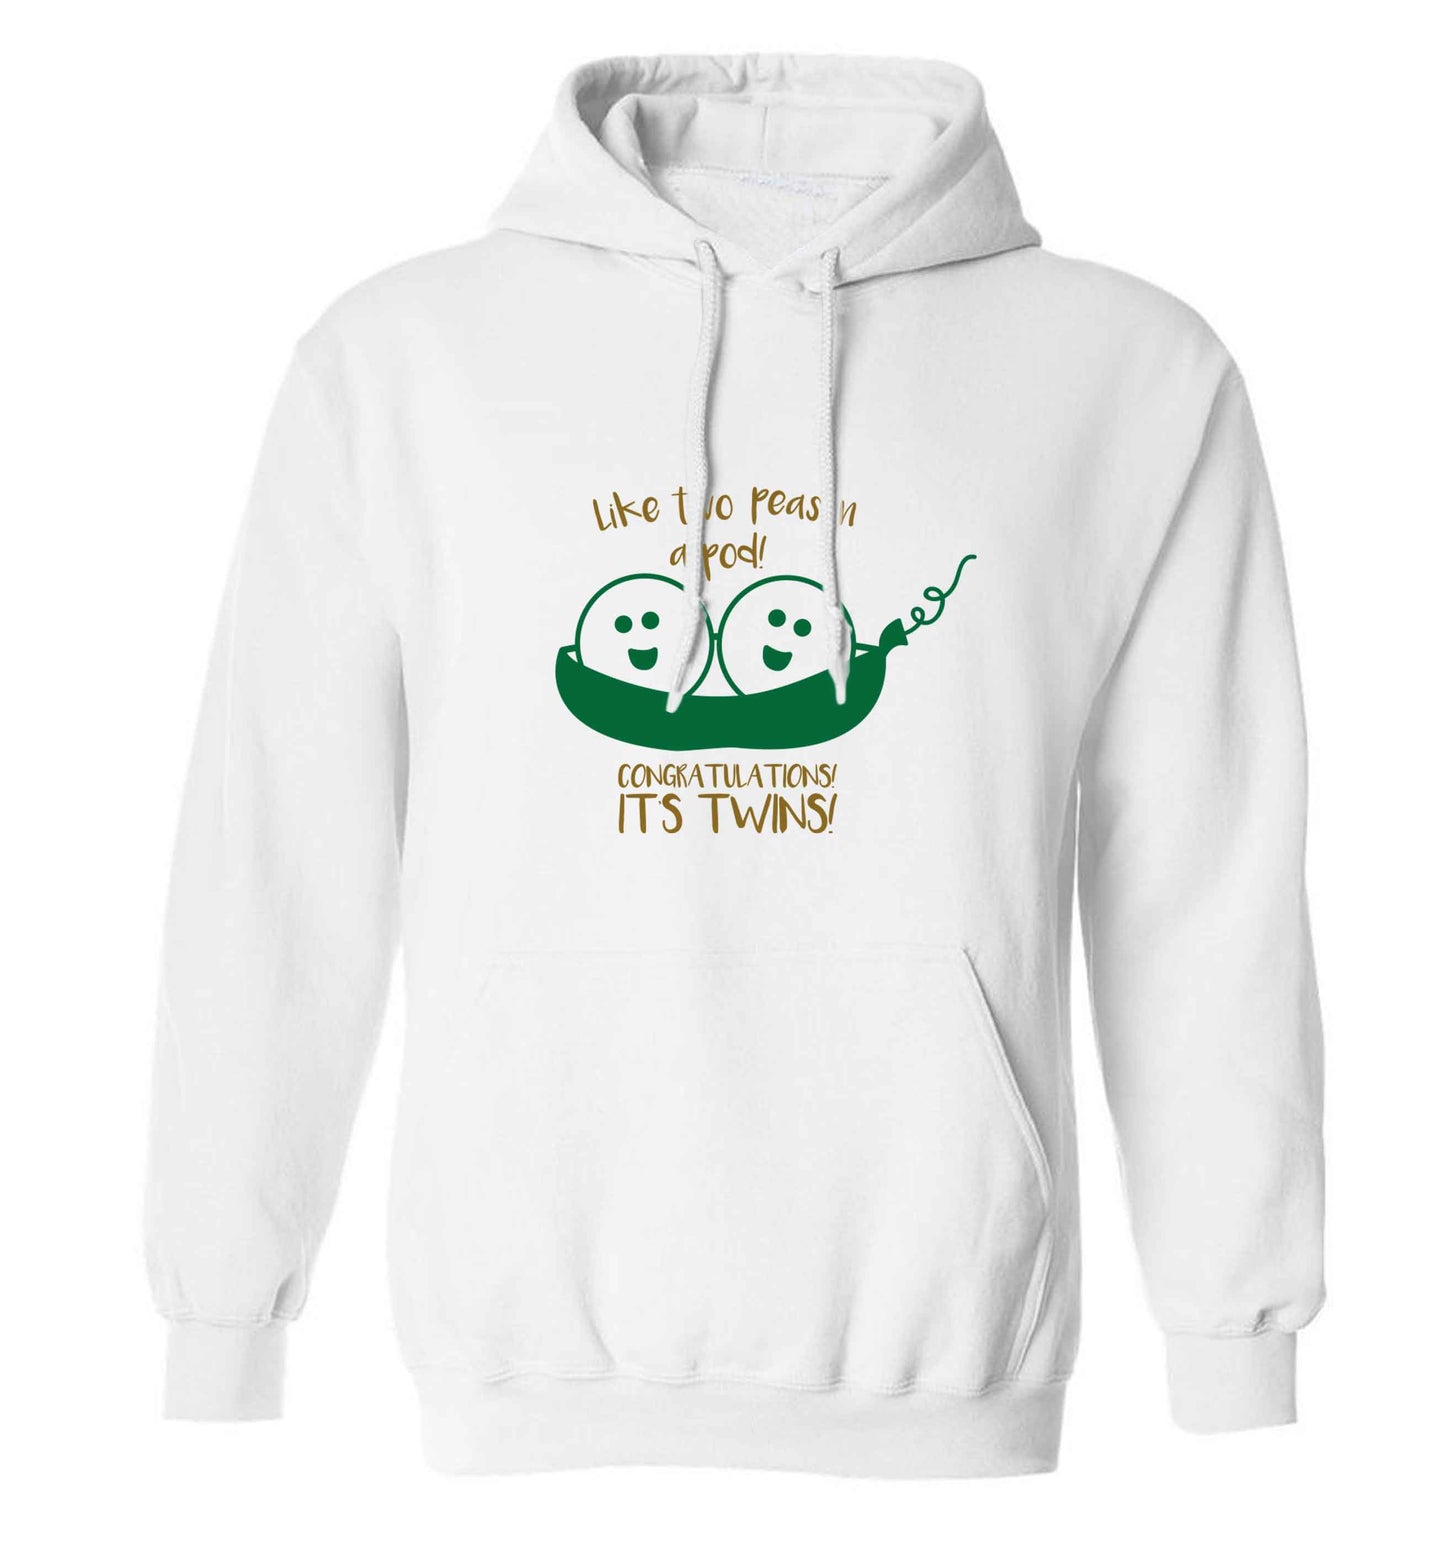 Like two peas in a pod! Congratulations it's twins! adults unisex white hoodie 2XL